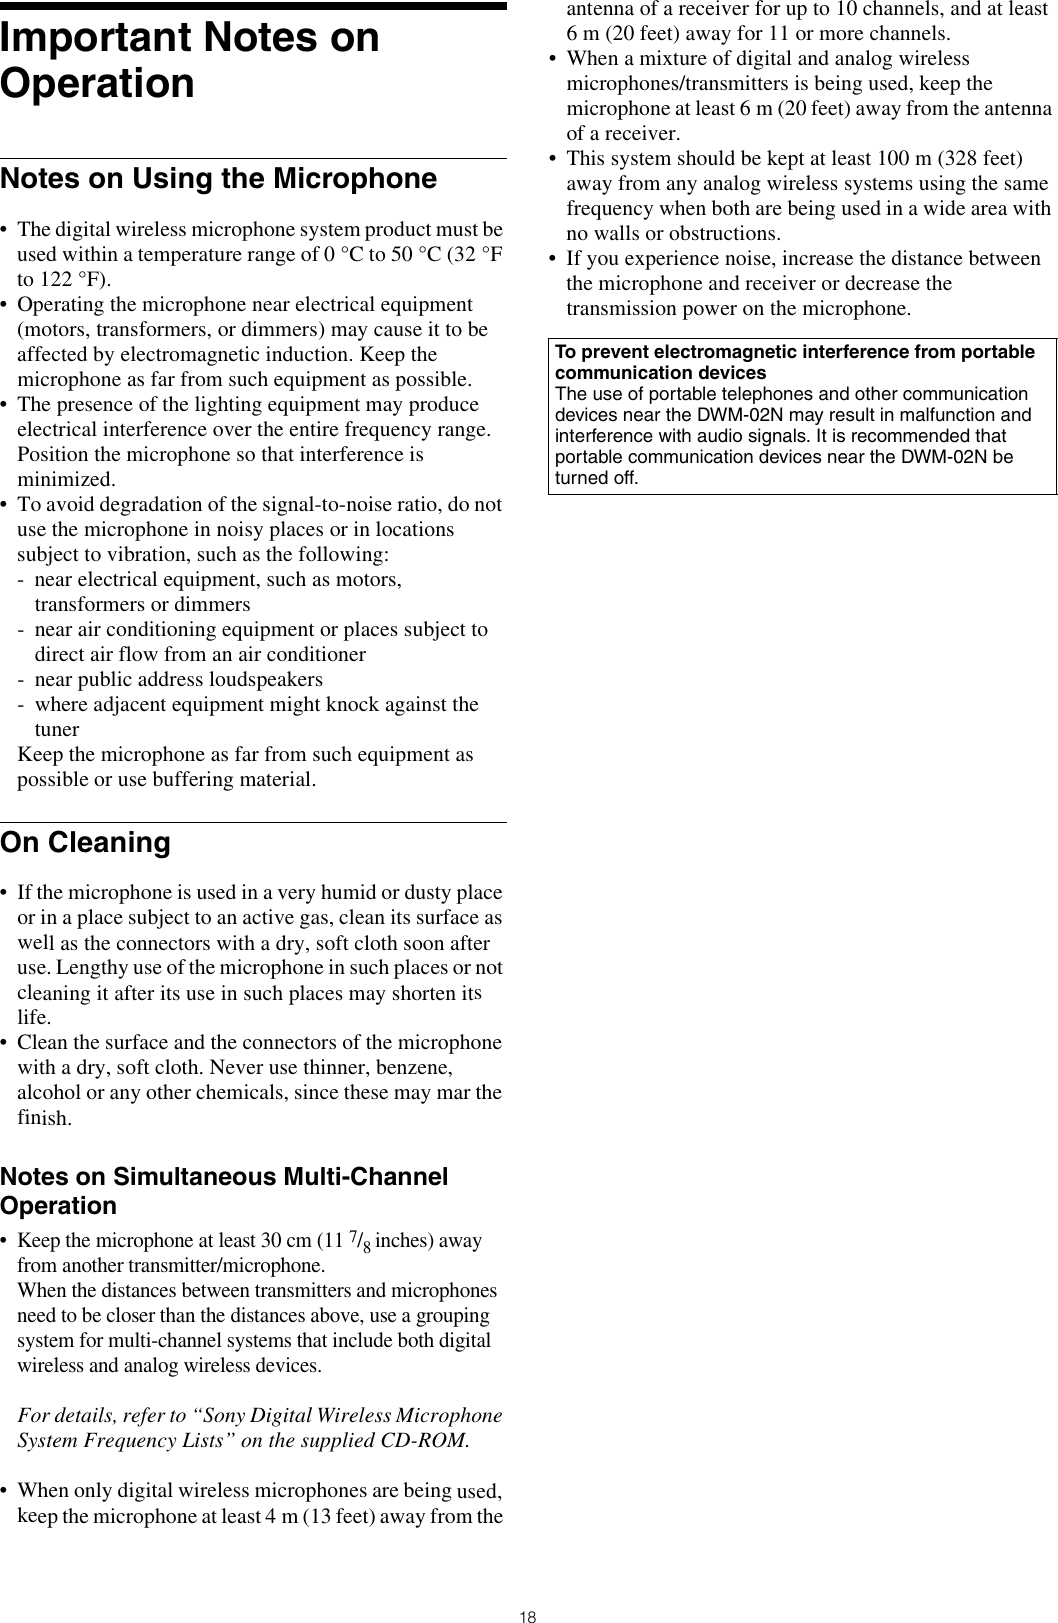 18Important Notes on OperationNotes on Using the Microphone• The digital wireless microphone system product must be used within a temperature range of 0 °C to 50 °C (32 °Fto 122 °F).• Operating the microphone near electrical equipment(motors, transformers, or dimmers) may cause it to beaffected by electromagnetic induction. Keep themicrophone as far from such equipment as possible.• The presence of the lighting equipment may produceelectrical interference over the entire frequency range.Position the microphone so that interference isminimized.• To avoid degradation of the signal-to-noise ratio, do notuse the microphone in noisy places or in locationssubject to vibration, such as the following:- near electrical equipment, such as motors,transformers or dimmers- near air conditioning equipment or places subject todirect air flow from an air conditioner- near public address loudspeakers- where adjacent equipment might knock against thetunerKeep the microphone as far from such equipment as possible or use buffering material.On Cleaning• If the microphone is used in a very humid or dusty placeor in a place subject to an active gas, clean its surface aswell as the connectors with a dry, soft cloth soon afteruse. Lengthy use of the microphone in such places or notcleaning it after its use in such places may shorten itslife.• Clean the surface and the connectors of the microphonewith a dry, soft cloth. Never use thinner, benzene,alcohol or any other chemicals, since these may mar thefinish.Notes on Simultaneous Multi-Channel Operation• Keep the microphone at least 30 cm (11 7/8 inches) awayfrom another transmitter/microphone.When the distances between transmitters and microphonesneed to be closer than the distances above, use a groupingsystem for multi-channel systems that include both digitalwireless and analog wireless devices.For details, refer to “Sony Digital Wireless MicrophoneSystem Frequency Lists” on the supplied CD-ROM.• When only digital wireless microphones are being used,keep the microphone at least 4 m (13 feet) away from the antenna of a receiver for up to 10 channels, and at least 6 m (20 feet) away for 11 or more channels.• When a mixture of digital and analog wirelessmicrophones/transmitters is being used, keep themicrophone at least 6 m (20 feet) away from the antennaof a receiver.• This system should be kept at least 100 m (328 feet)away from any analog wireless systems using the samefrequency when both are being used in a wide area withno walls or obstructions.• If you experience noise, increase the distance betweenthe microphone and receiver or decrease thetransmission power on the microphone.To prevent electromagnetic interference from portable communication devicesThe use of portable telephones and other communication devices near the DWM-02N may result in malfunction and interference with audio signals. It is recommended that portable communication devices near the DWM-02N be turned off.